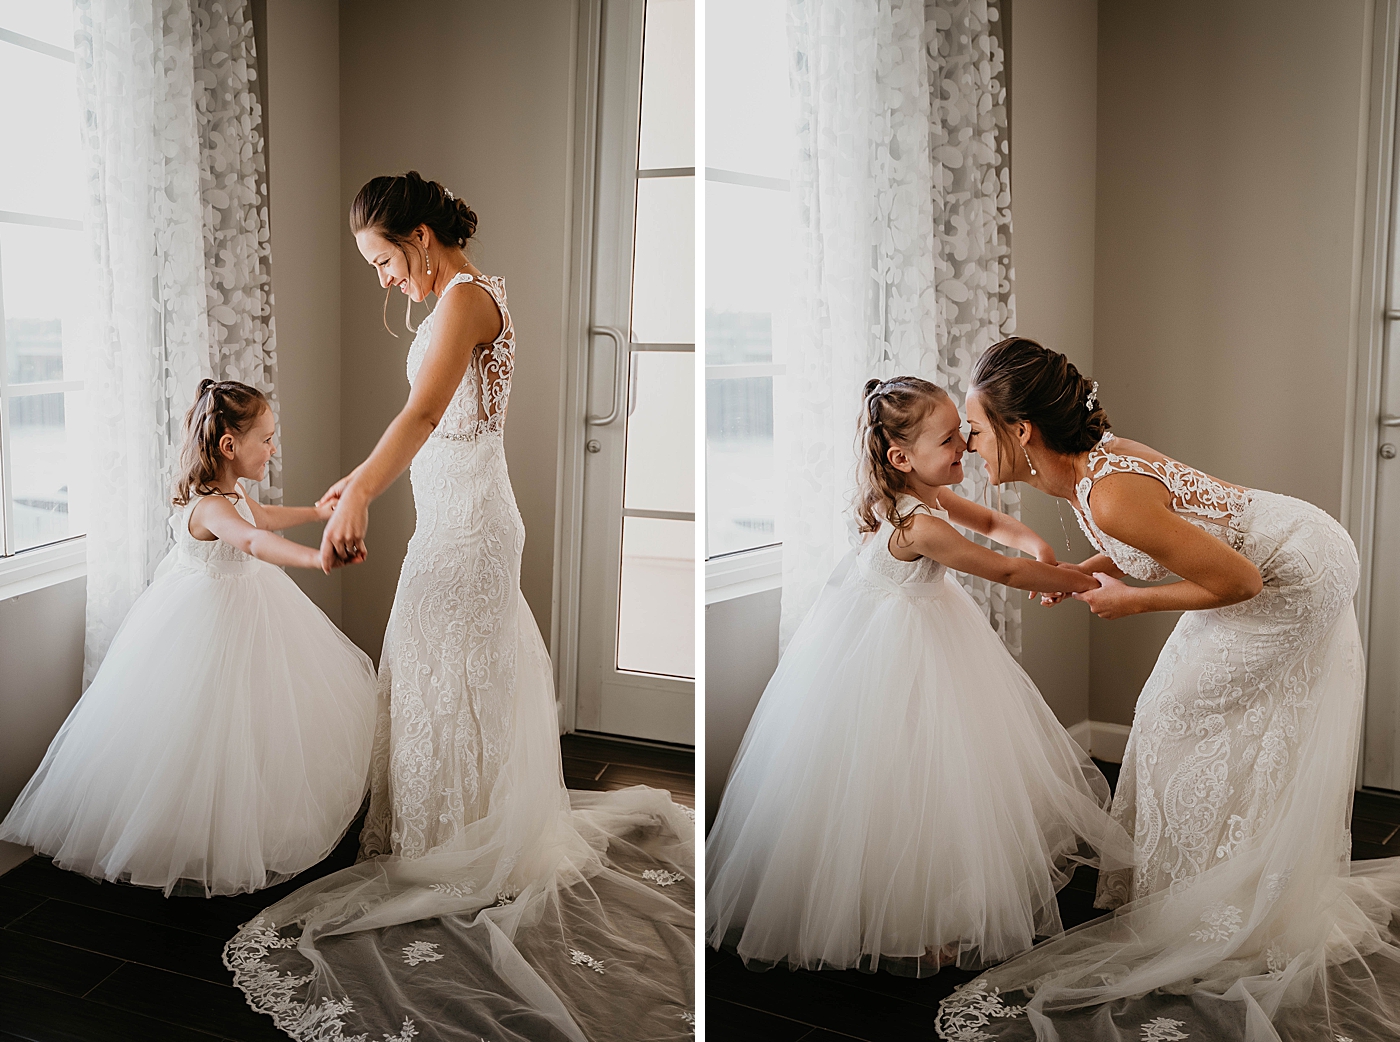 Bride and Flower Girl getting ready Out of the Blue Celebrations Wedding Photography captured by South Florida Wedding Photographer Krystal Capone Photography 